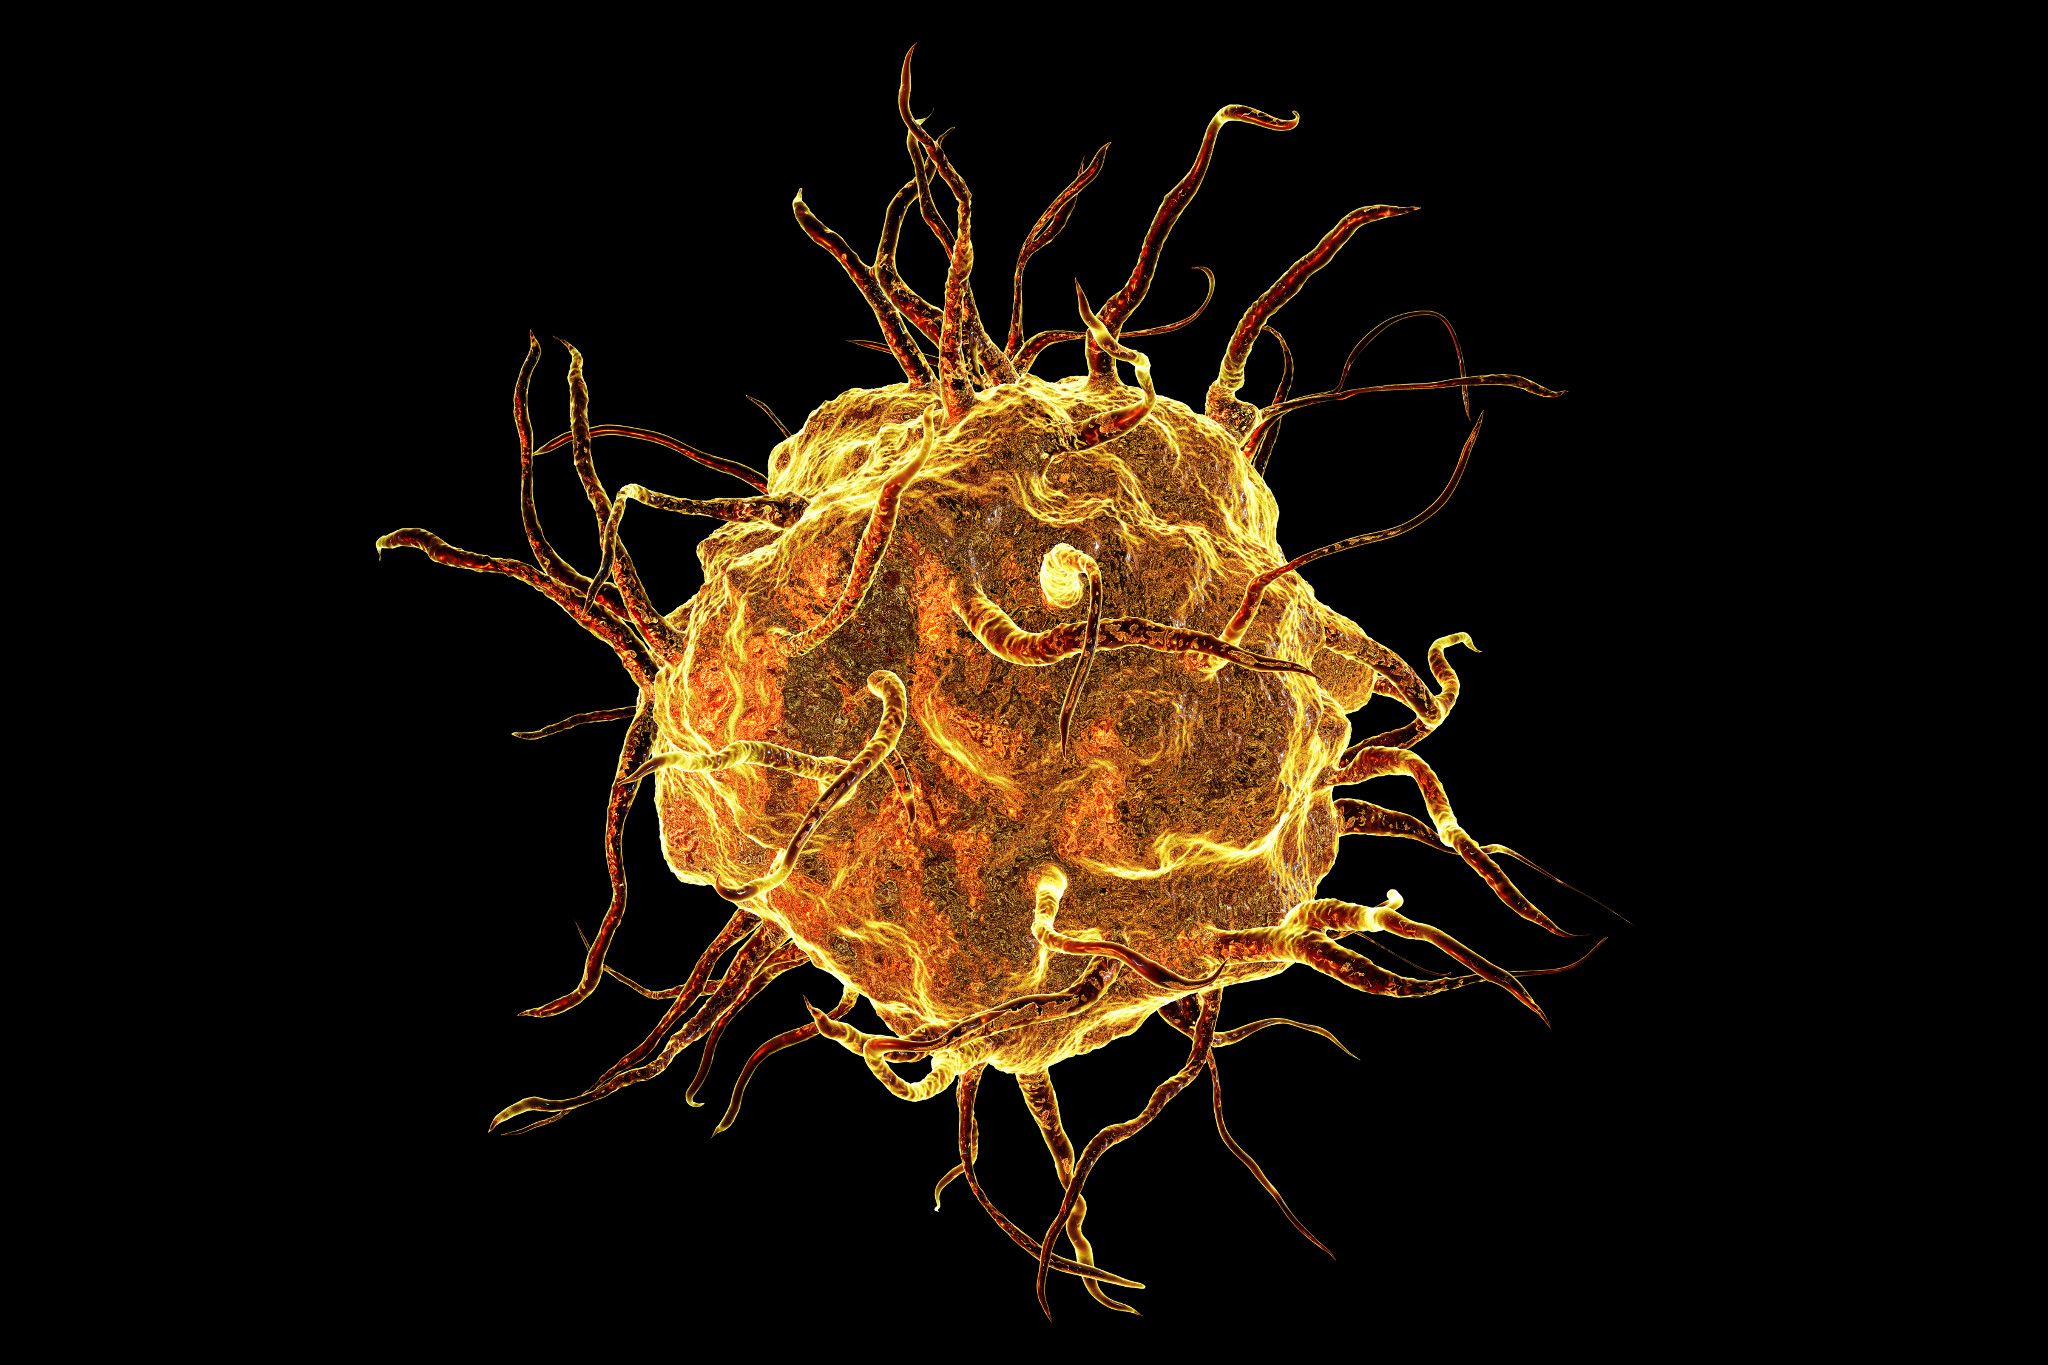 Macrophage cell isolated on black background, monocyte, close-up view of immune cell, 3D illustration